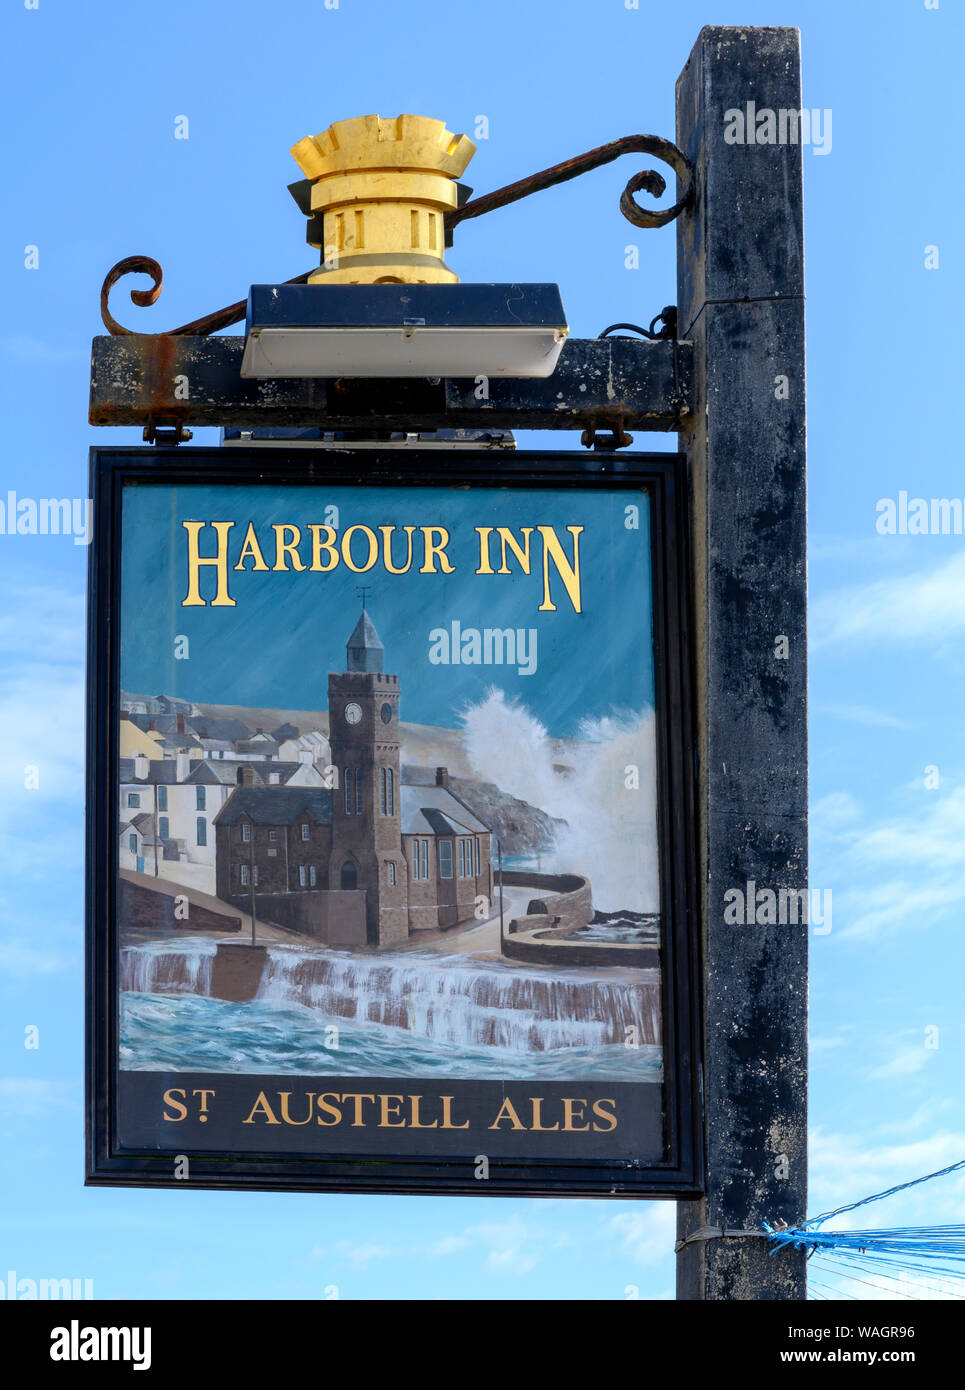 Hanging Pub sign at Harbour Inn - public house - Commercial Road, Porthleven, Cornwall, England, UK Stock Photo